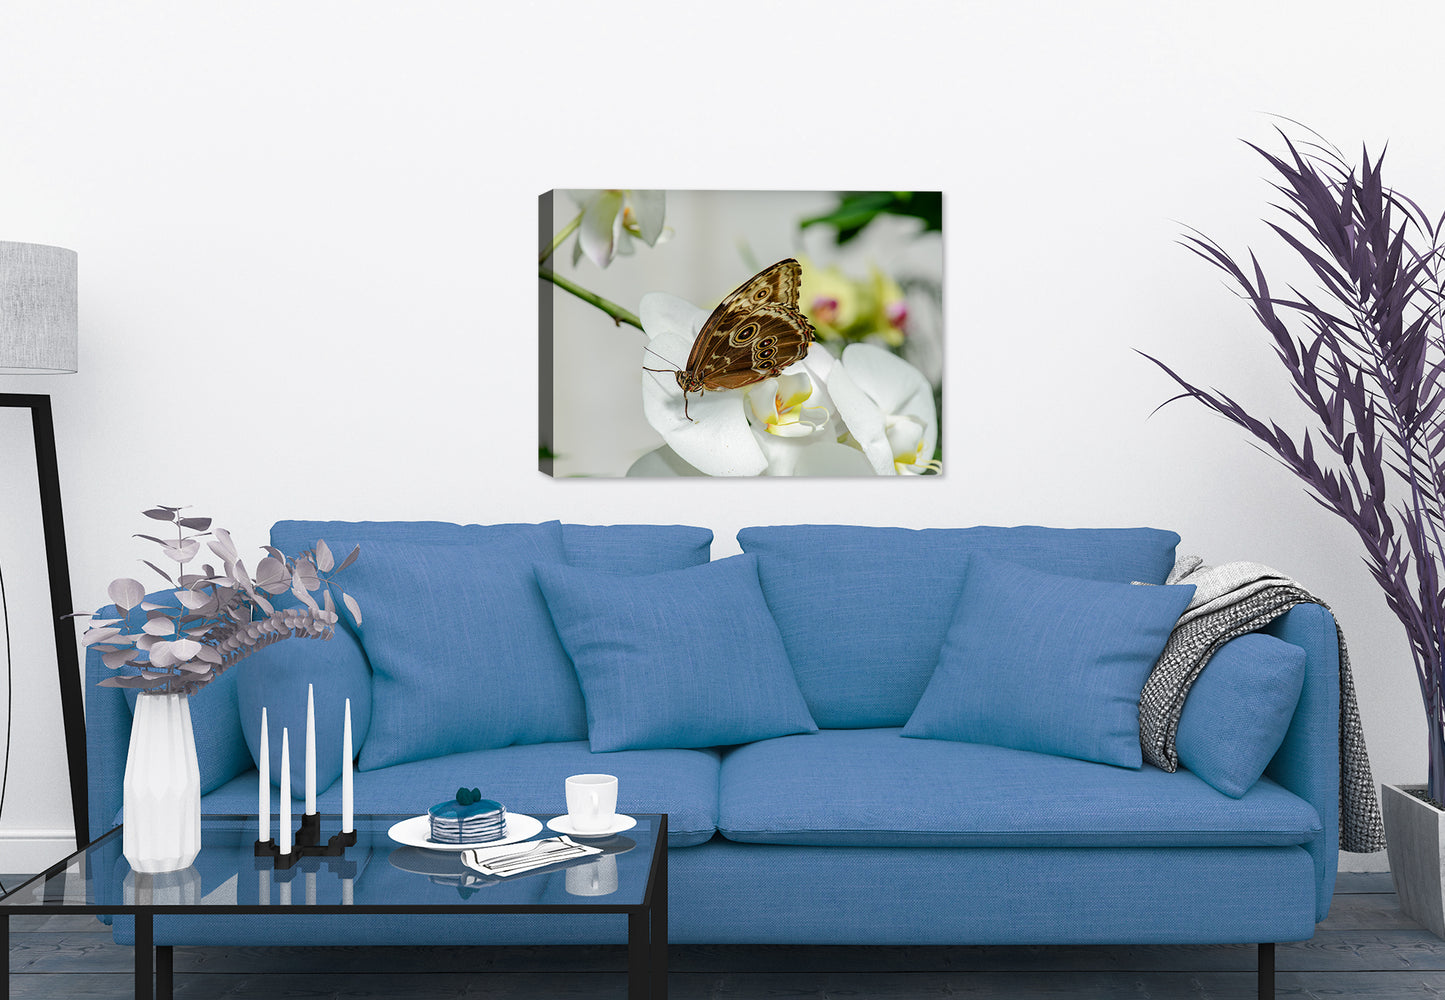 Monarch Butterfly on White Orchid - Fine Art Giclee